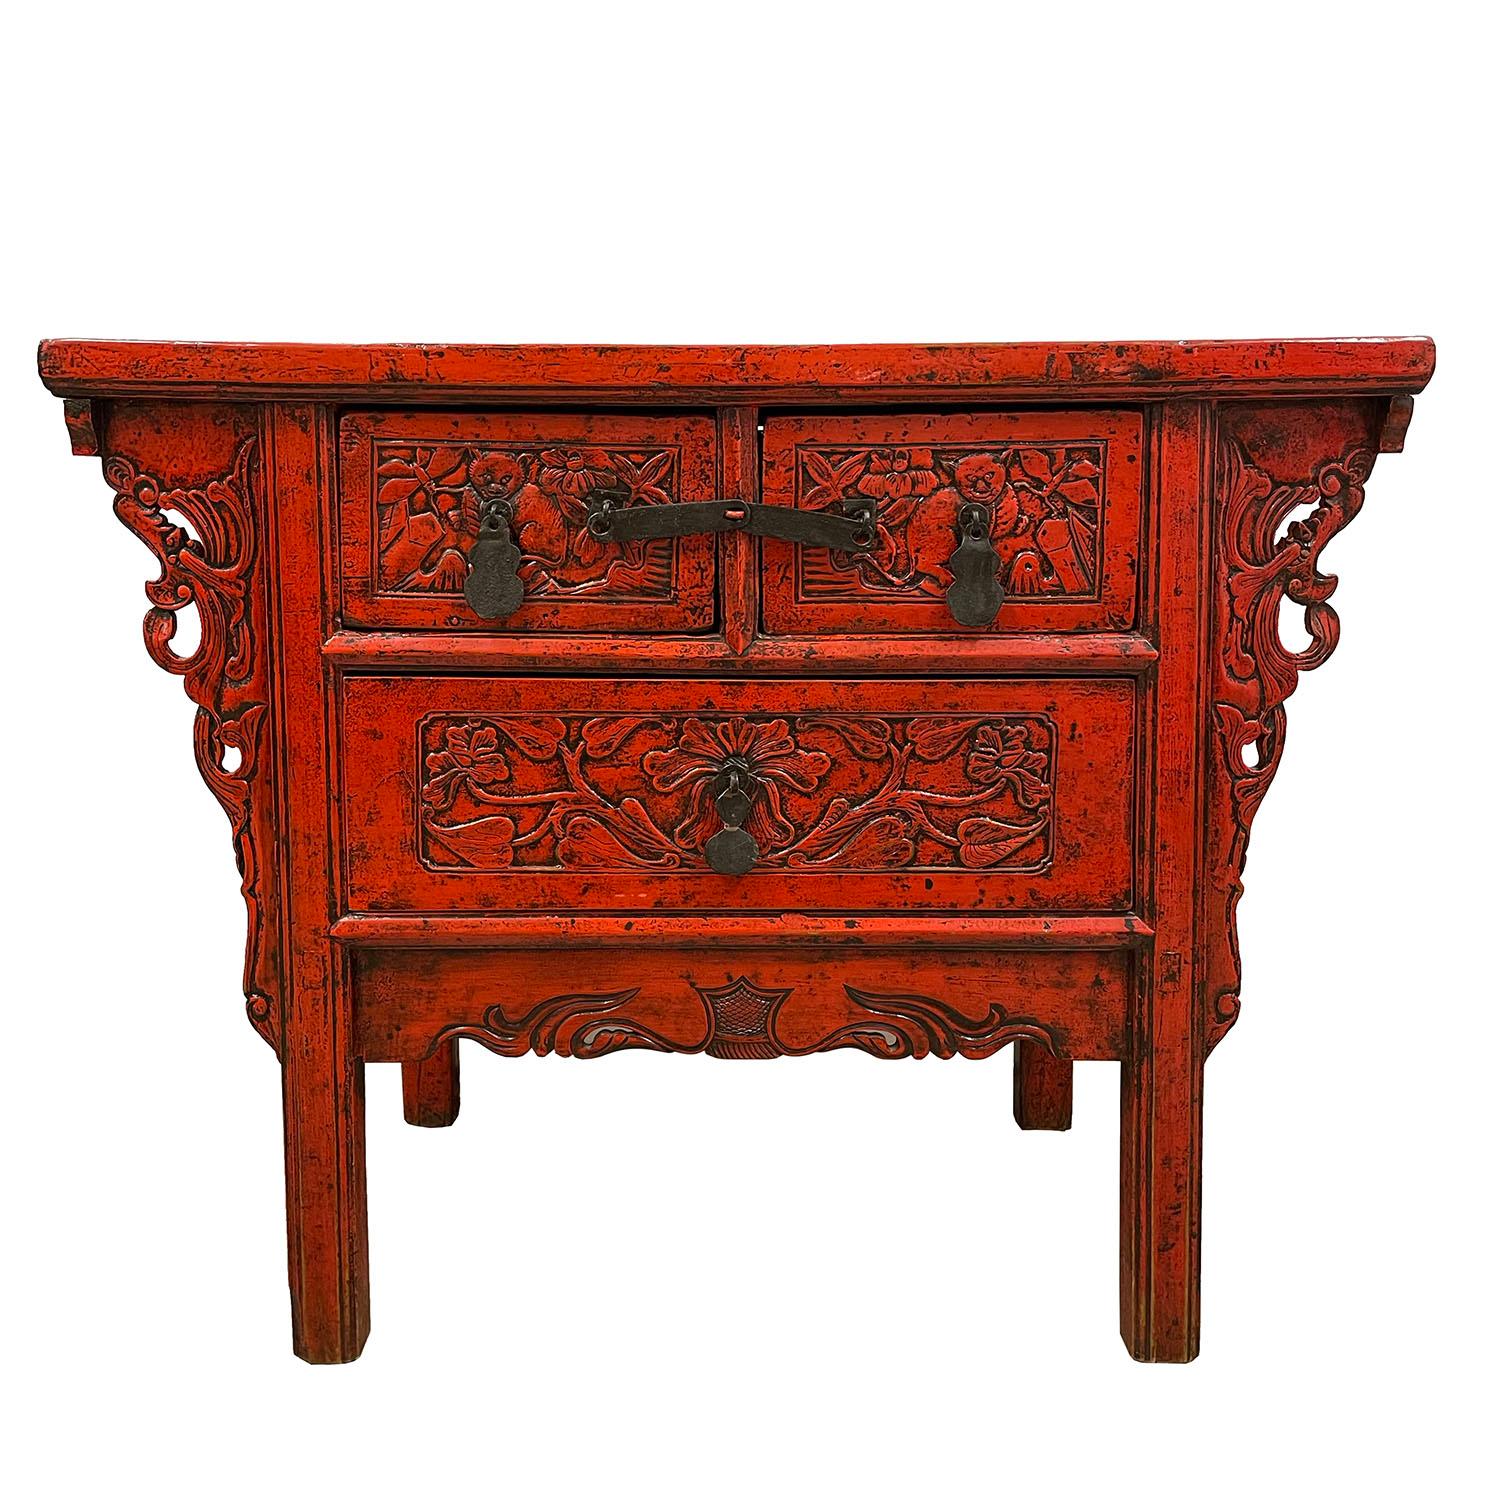 Chinese Export 19th Century Antique Chinese Carved Red Lacquer Console Table / Sideboard For Sale